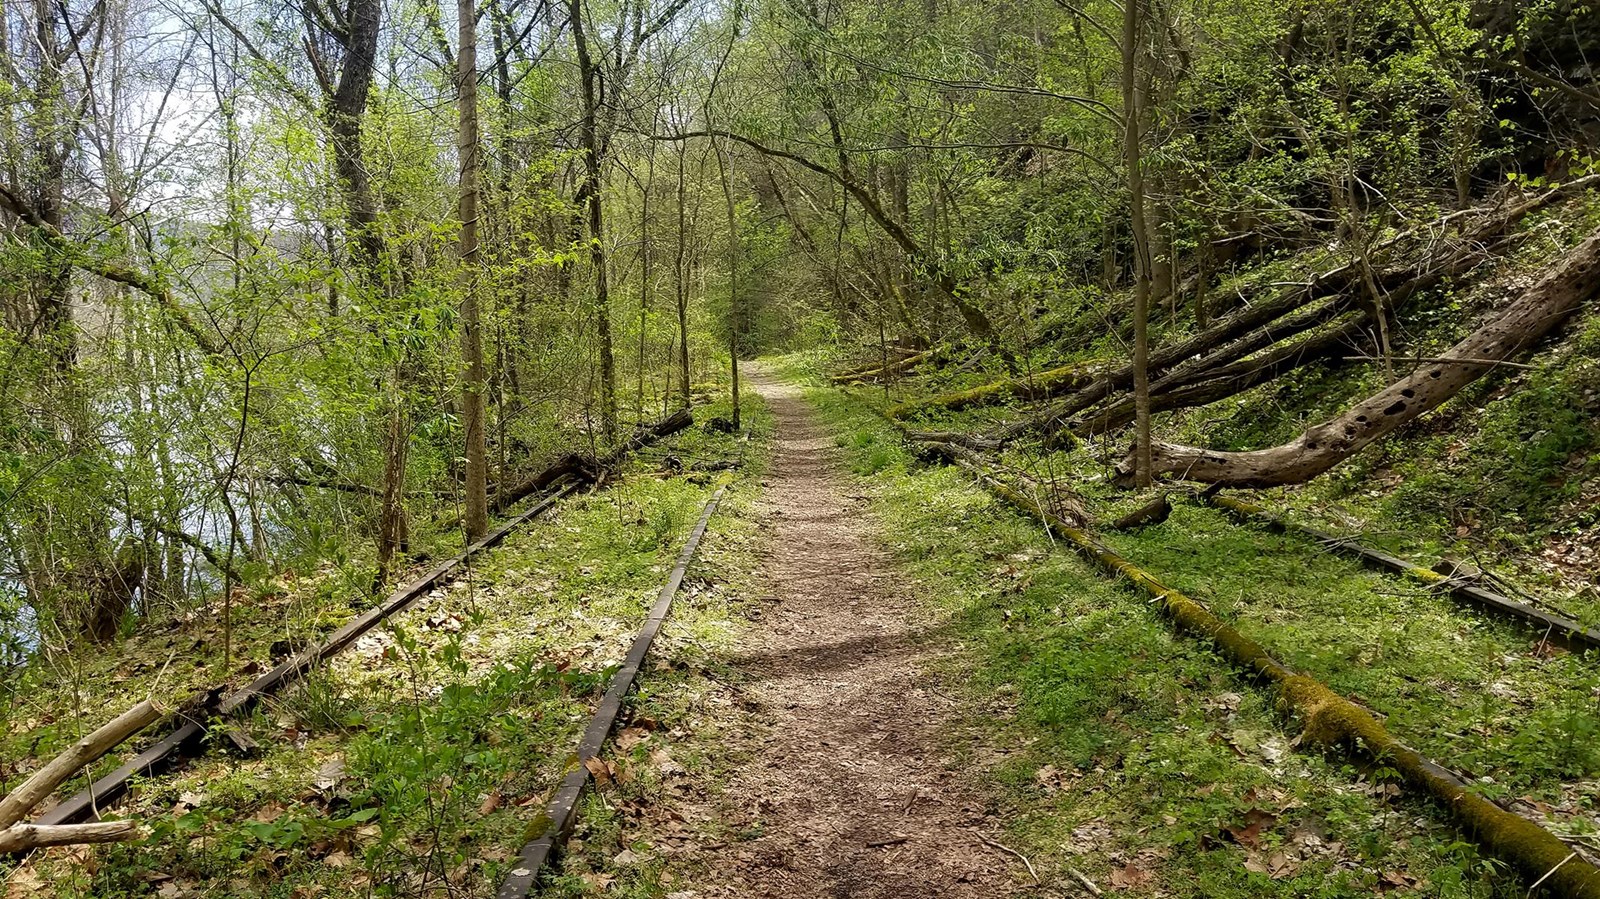 The trail alongside railroad track ruins through the forest